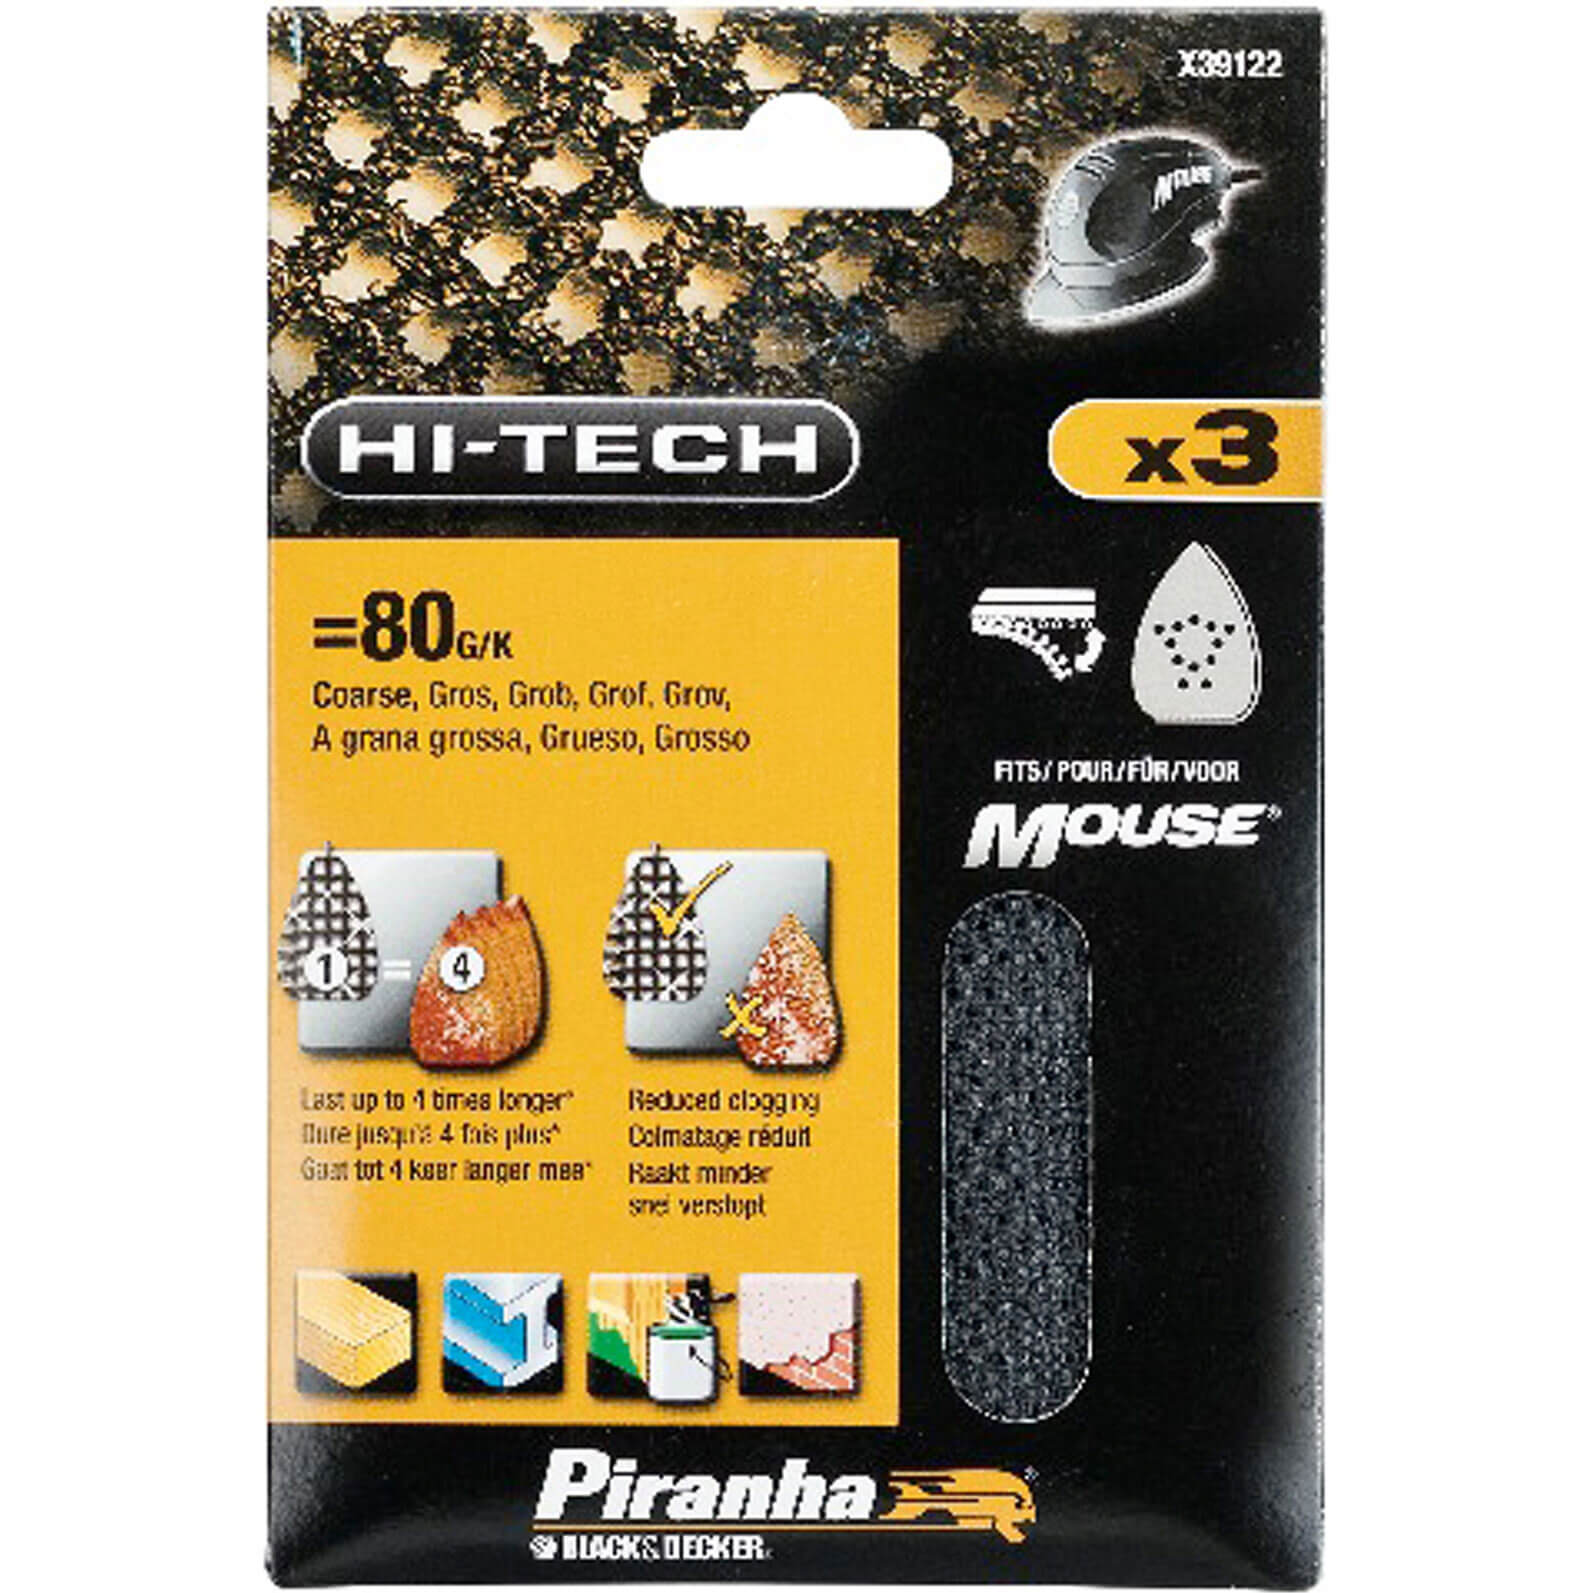 Image of Black and Decker Piranha Hi Tech Quick Fit Mesh Mouse Sanding Sheets 80g Pack of 3